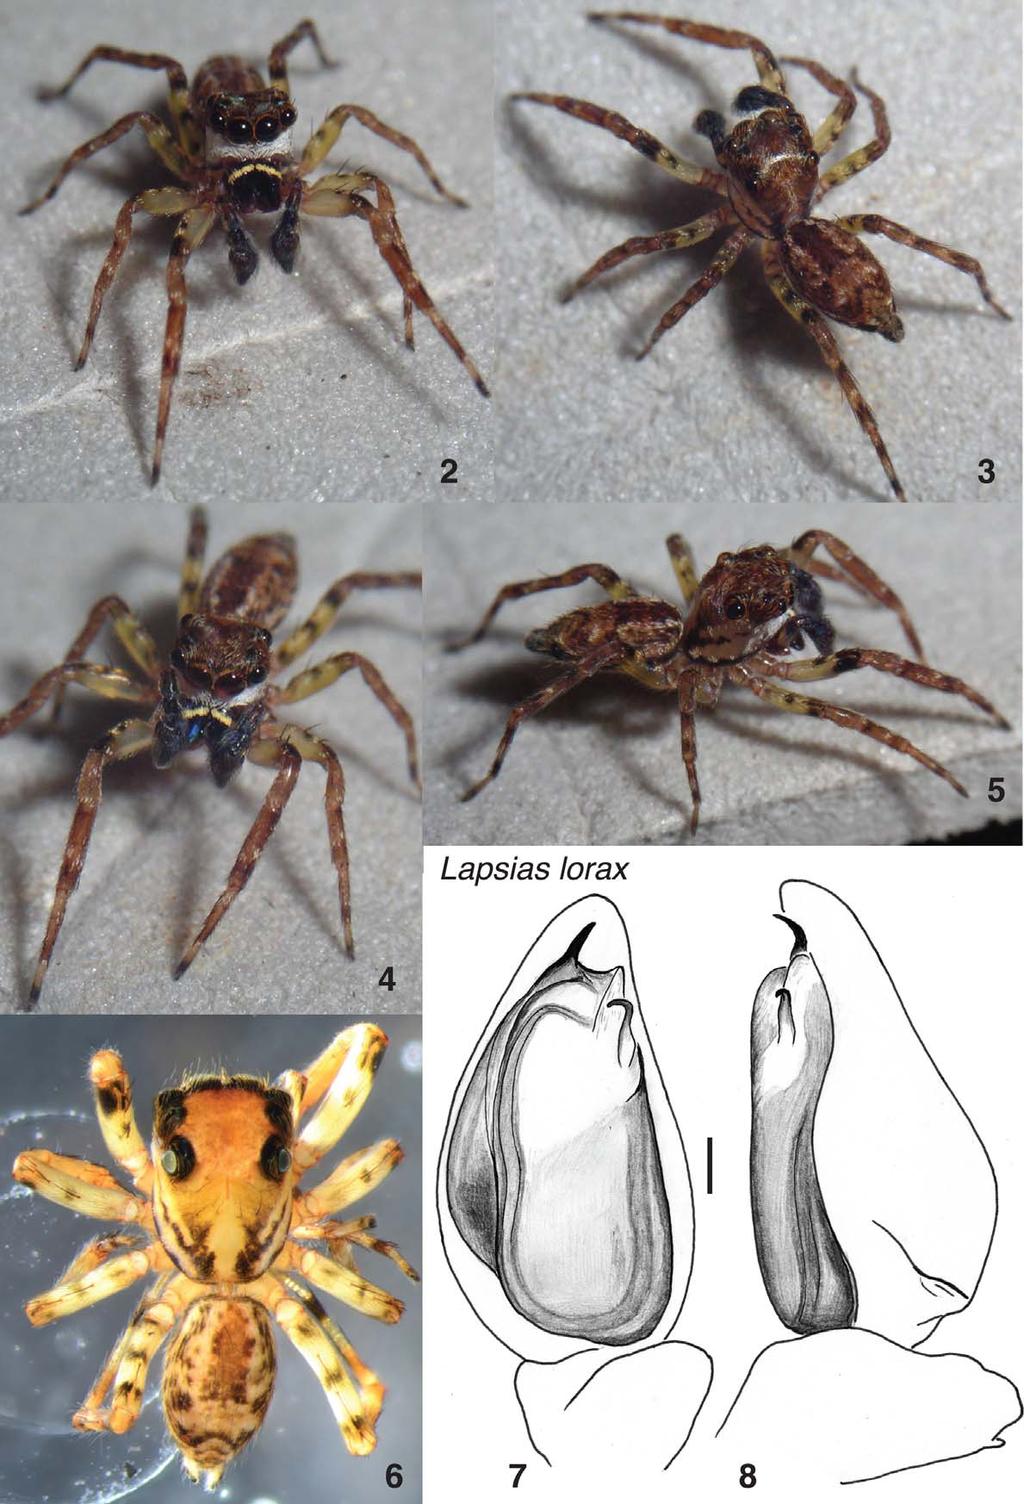 FIGURES 2 8. Lapsias lorax, sp. n. 2 6 holotype male 7 left male palp, ventral view 8 left male palp, retrolateral view. Scale bar = 0.1 mm.